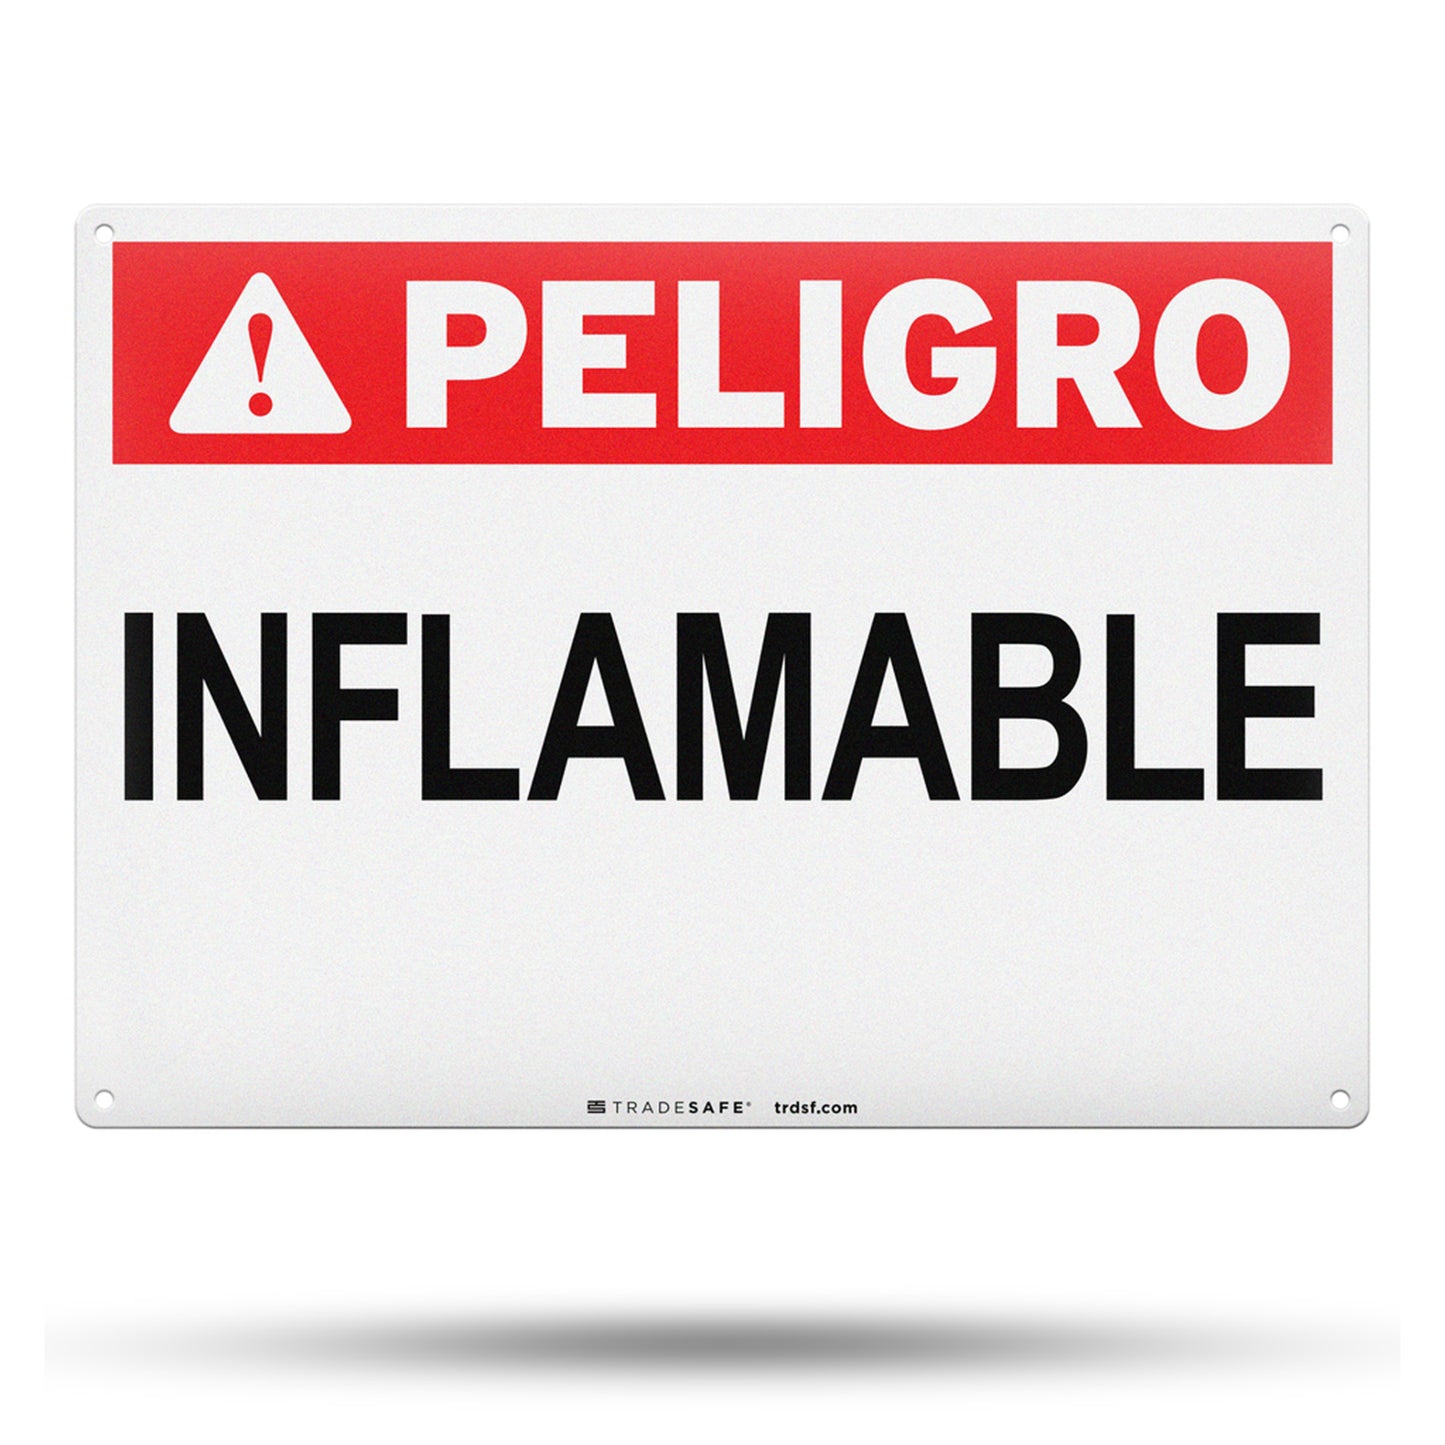 peligro inflamable sign